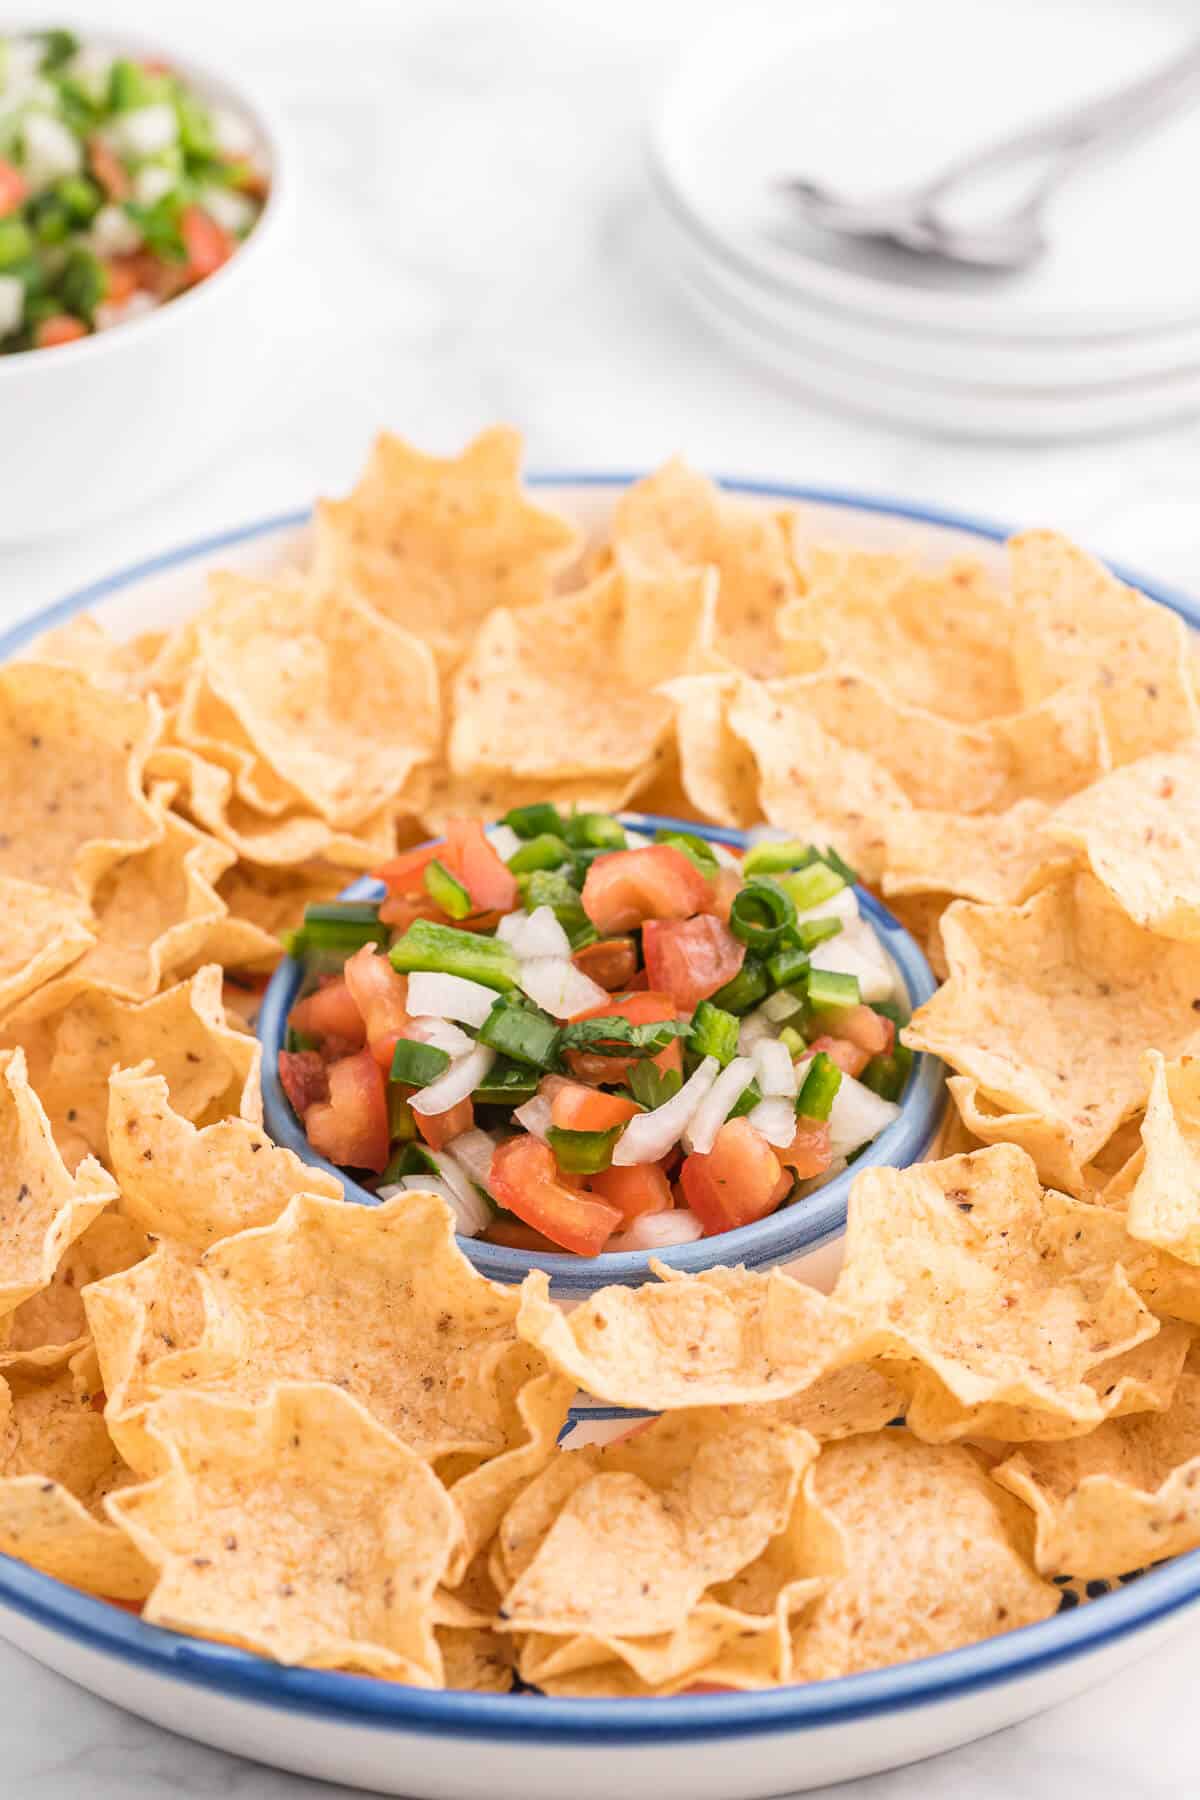 Pico de Gallo - The perfect Taco Tuesday topping! A super simple salsa recipe with tomatoes, peppers, onions, cilantro, and lime juice.